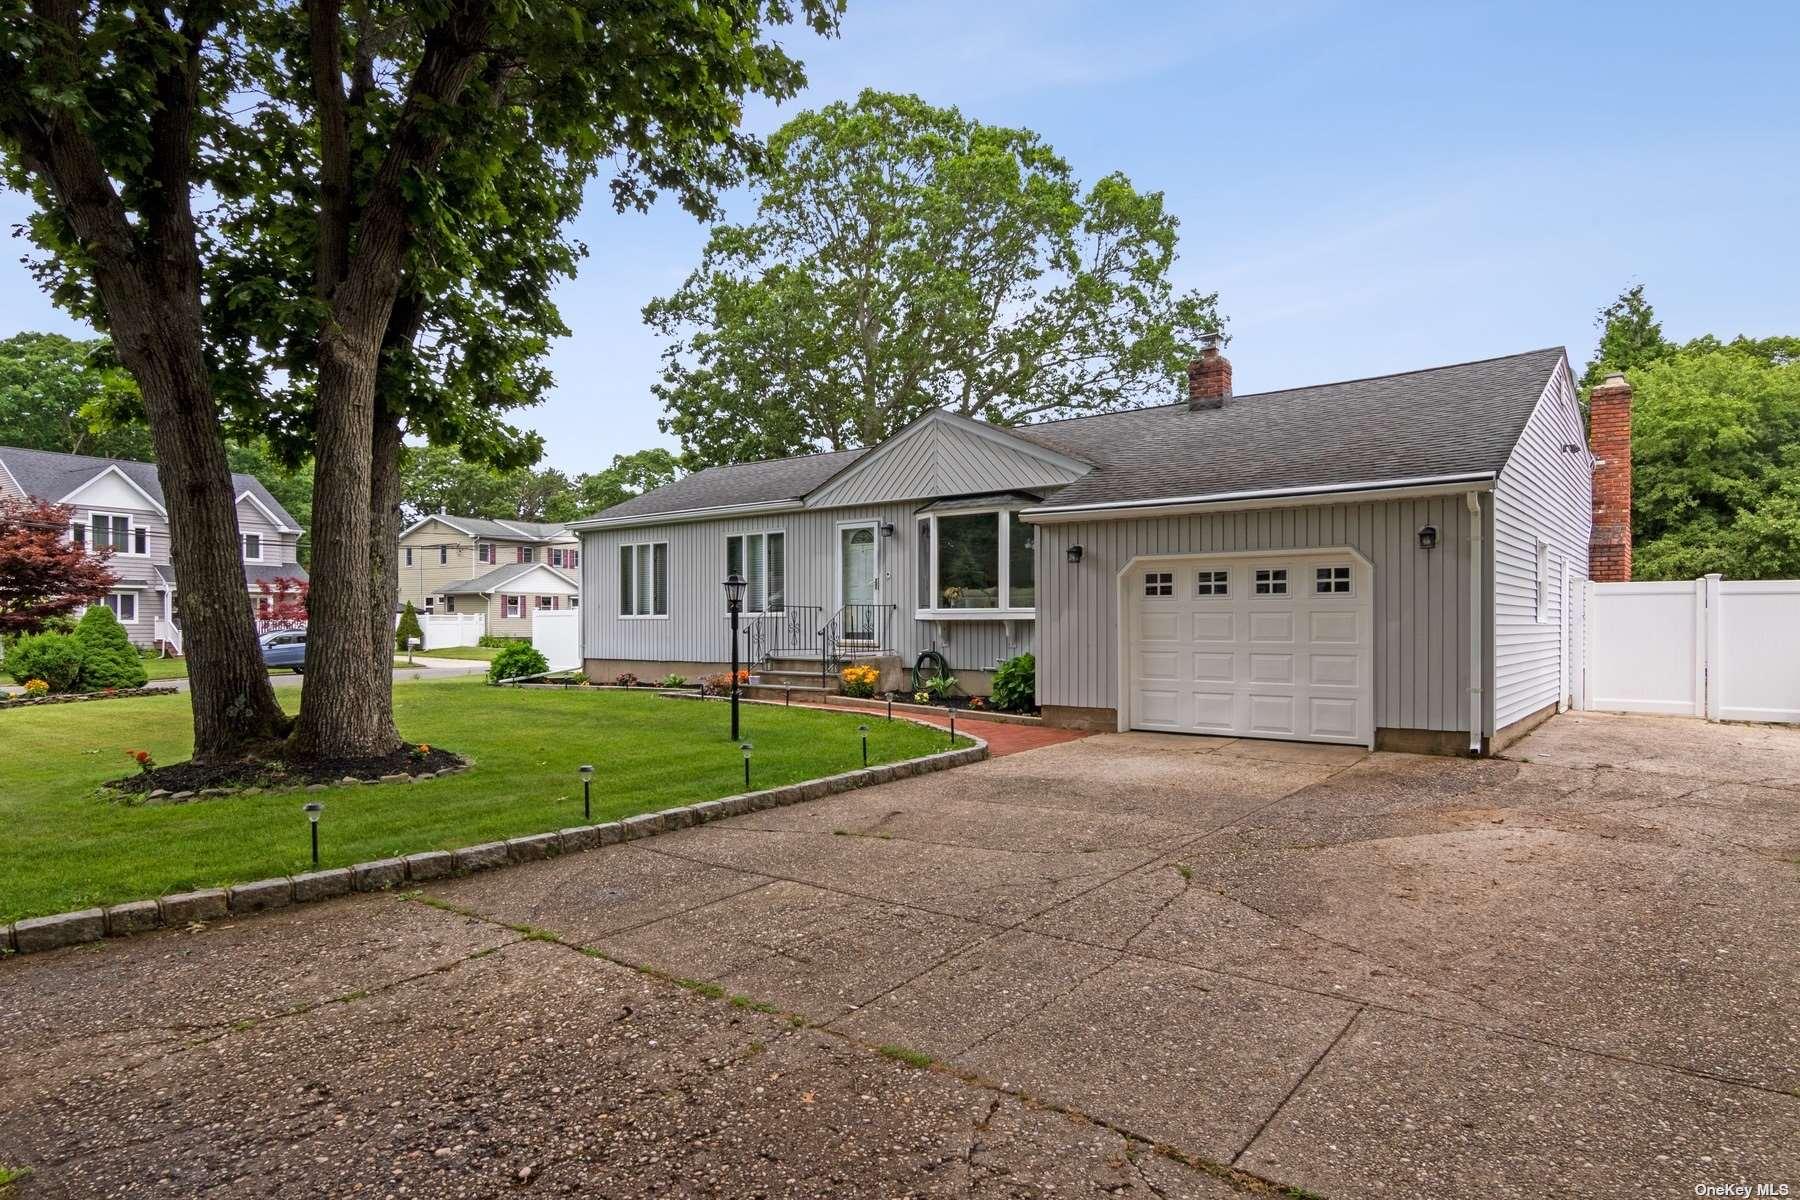 81 Mobile Street in Long Island, Sayville, NY 11782